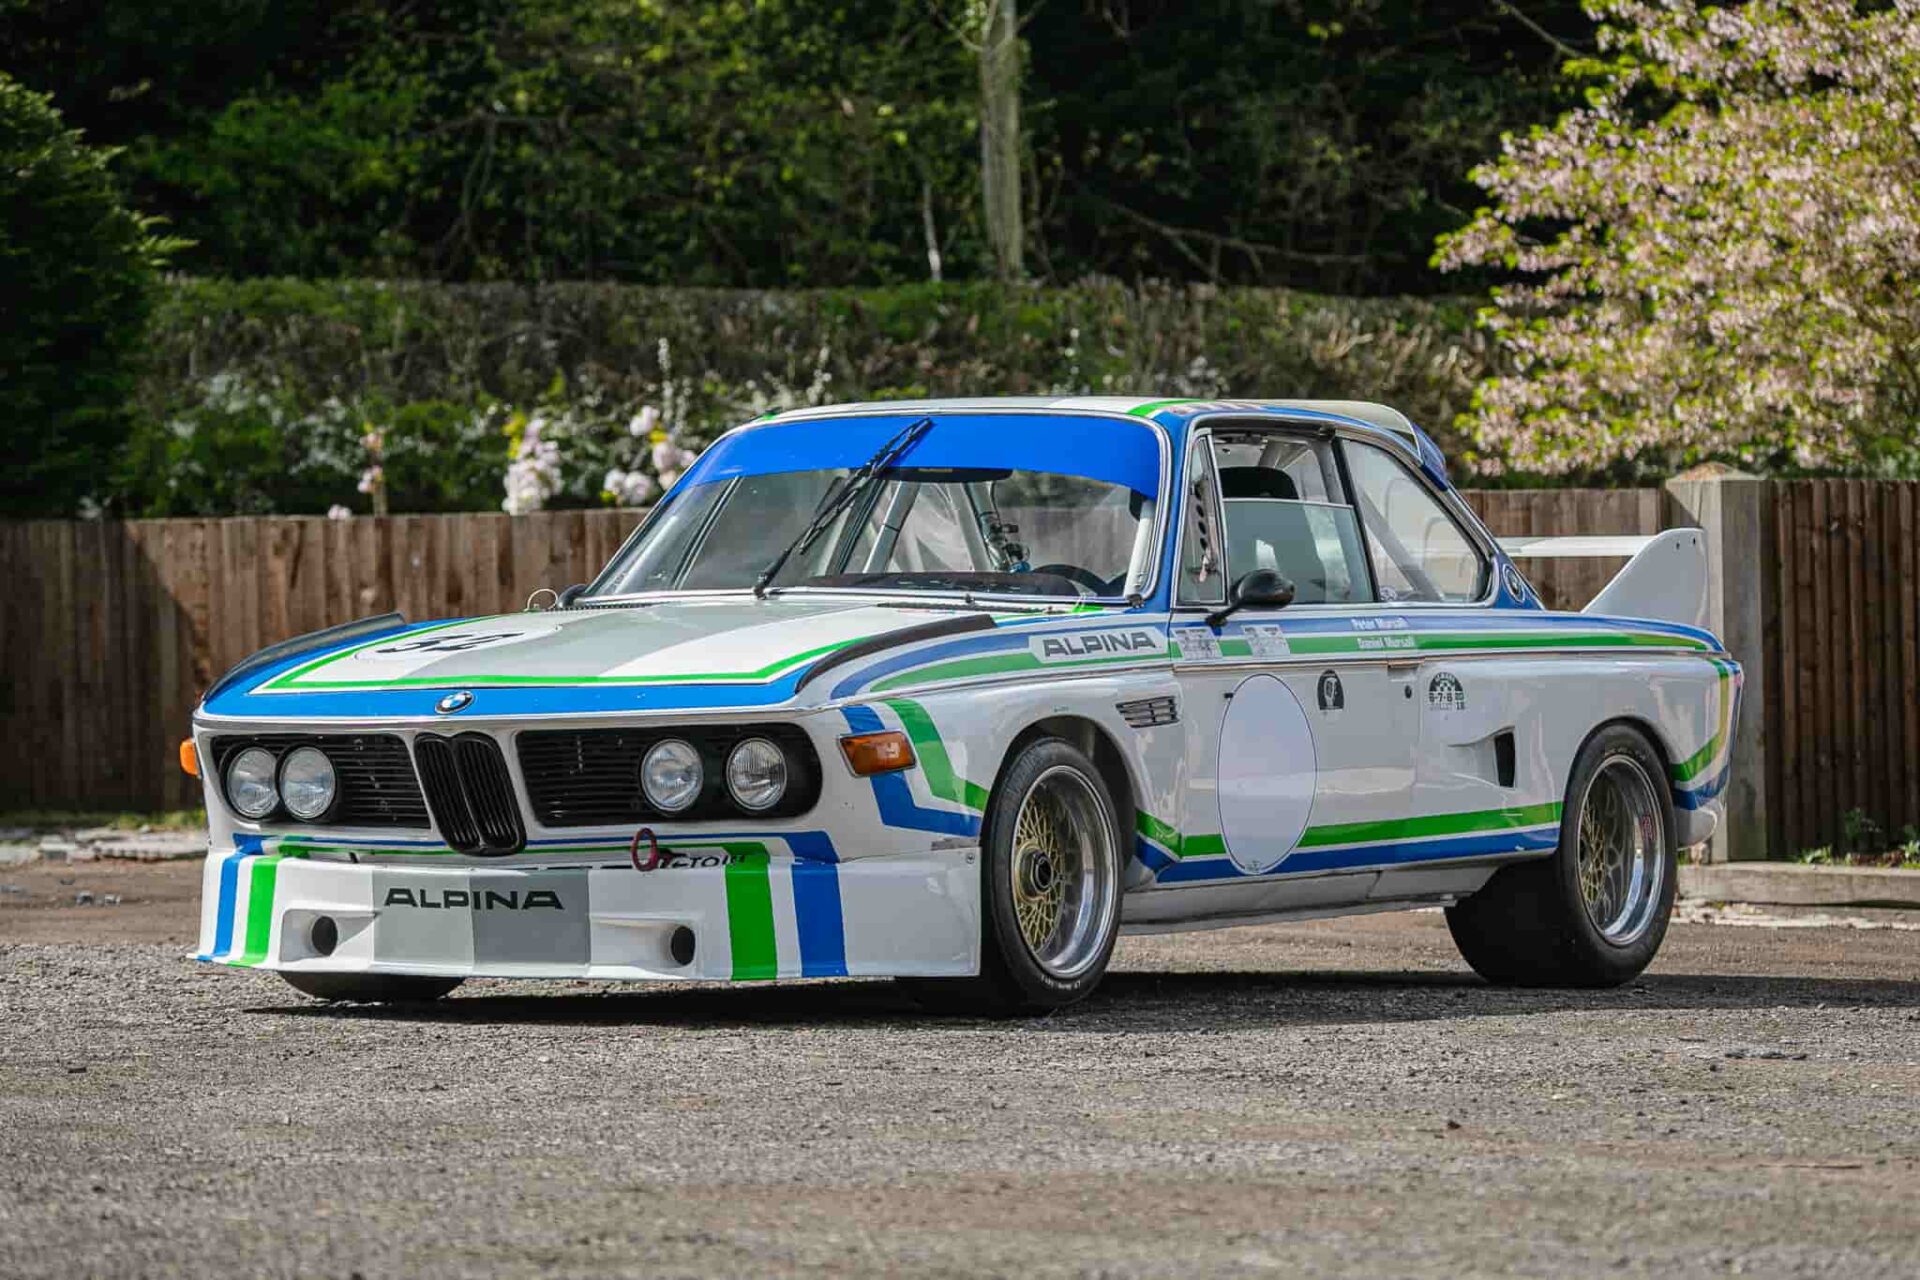 A 1973 BMW, once owned by Jamiroquai's Jay Kay, sold for £151,875 at auction. The 'CSL Batmobile' has a rich racing history and was auctioned at Sywell Aerodrome.